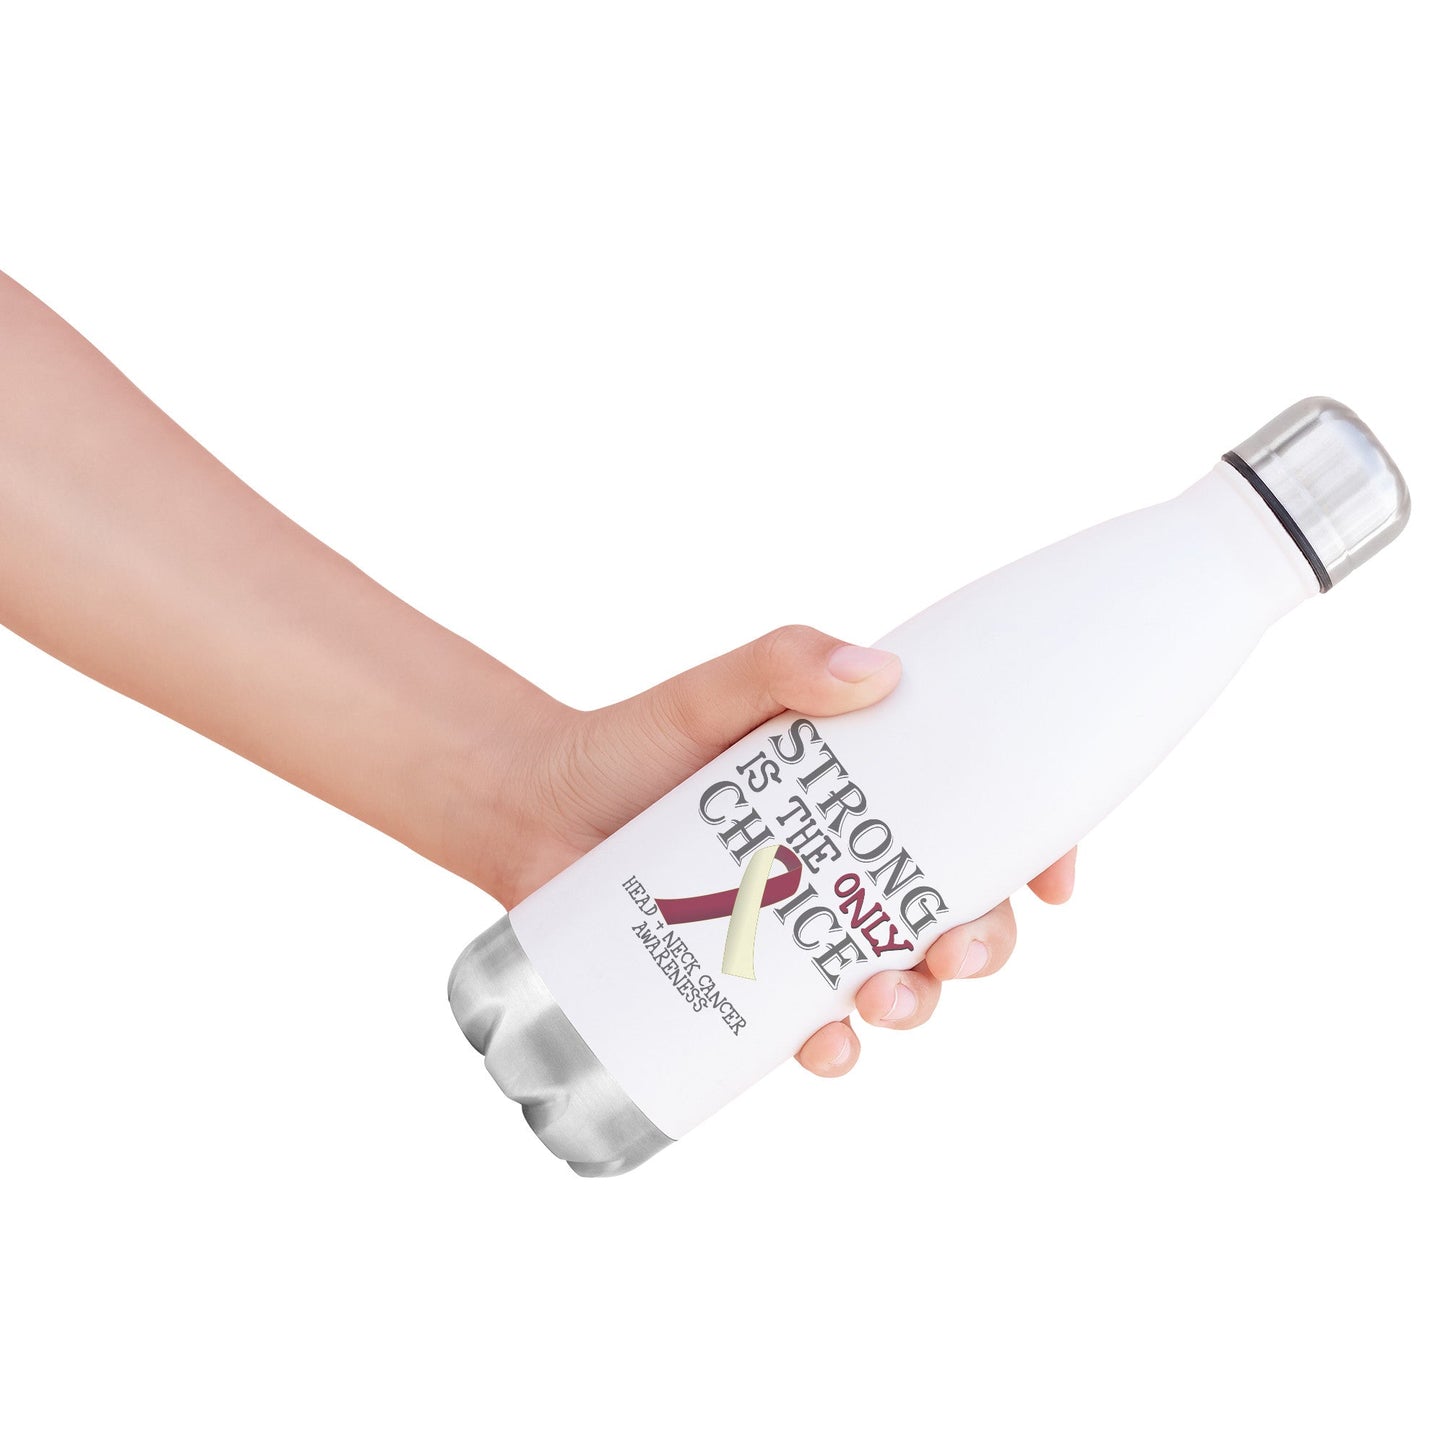 Strong is the Only Choice -Head and Neck Cancer Awareness 20oz Insulated Water Bottle |x|